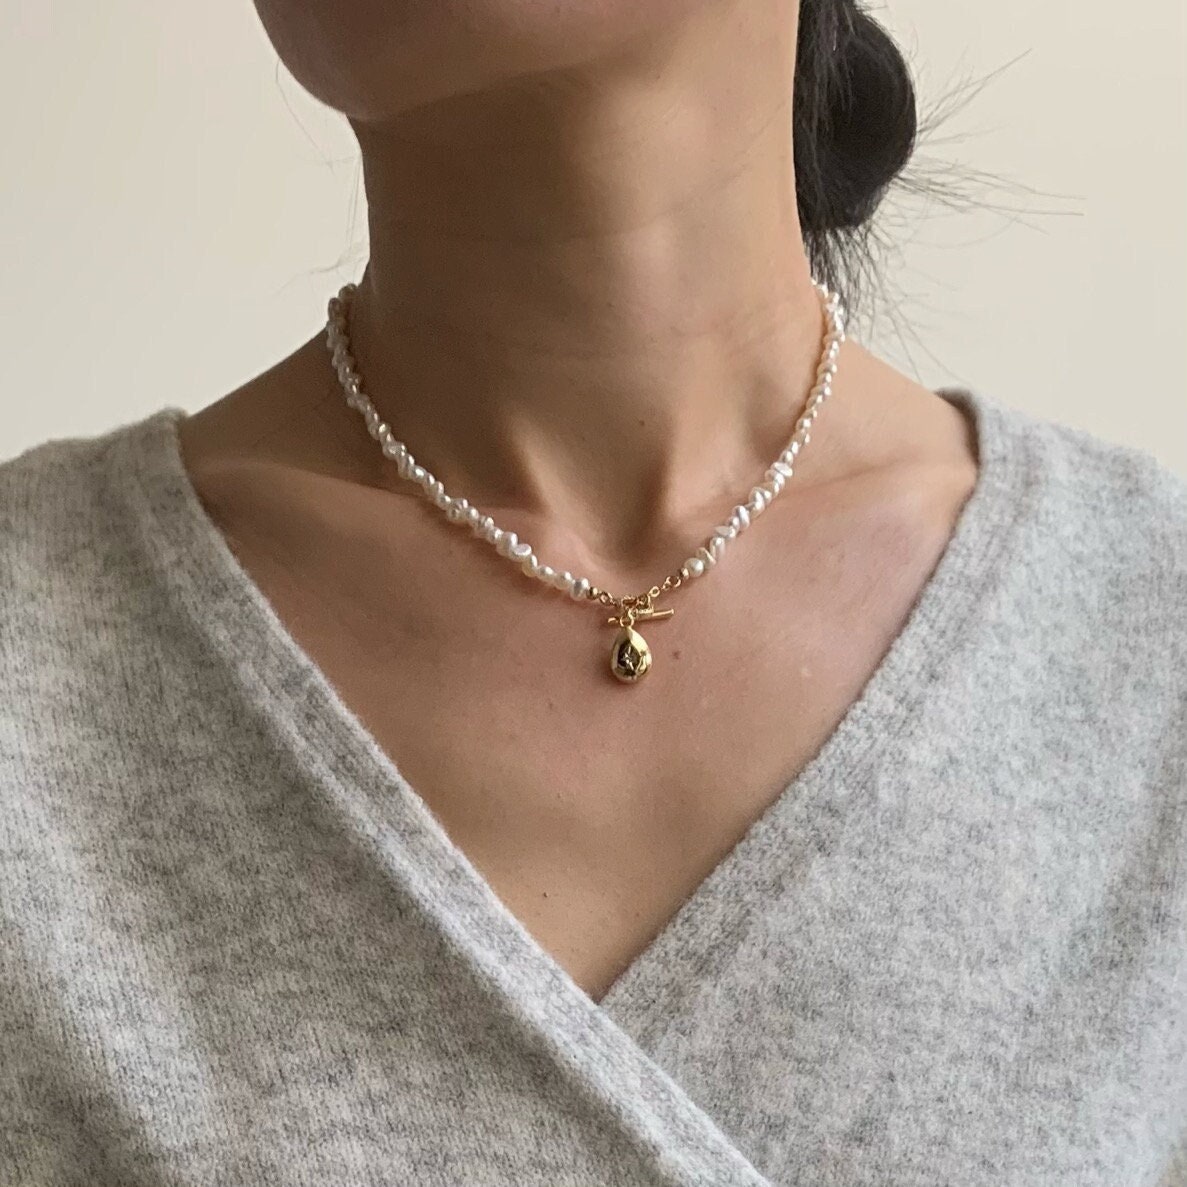 Baroque Pearl Beads Necklace With Gold Toggle Starburst Pendant, 18K Vermeil Ot Buckle Small Keshi Pendant Necklace, Gift For Her